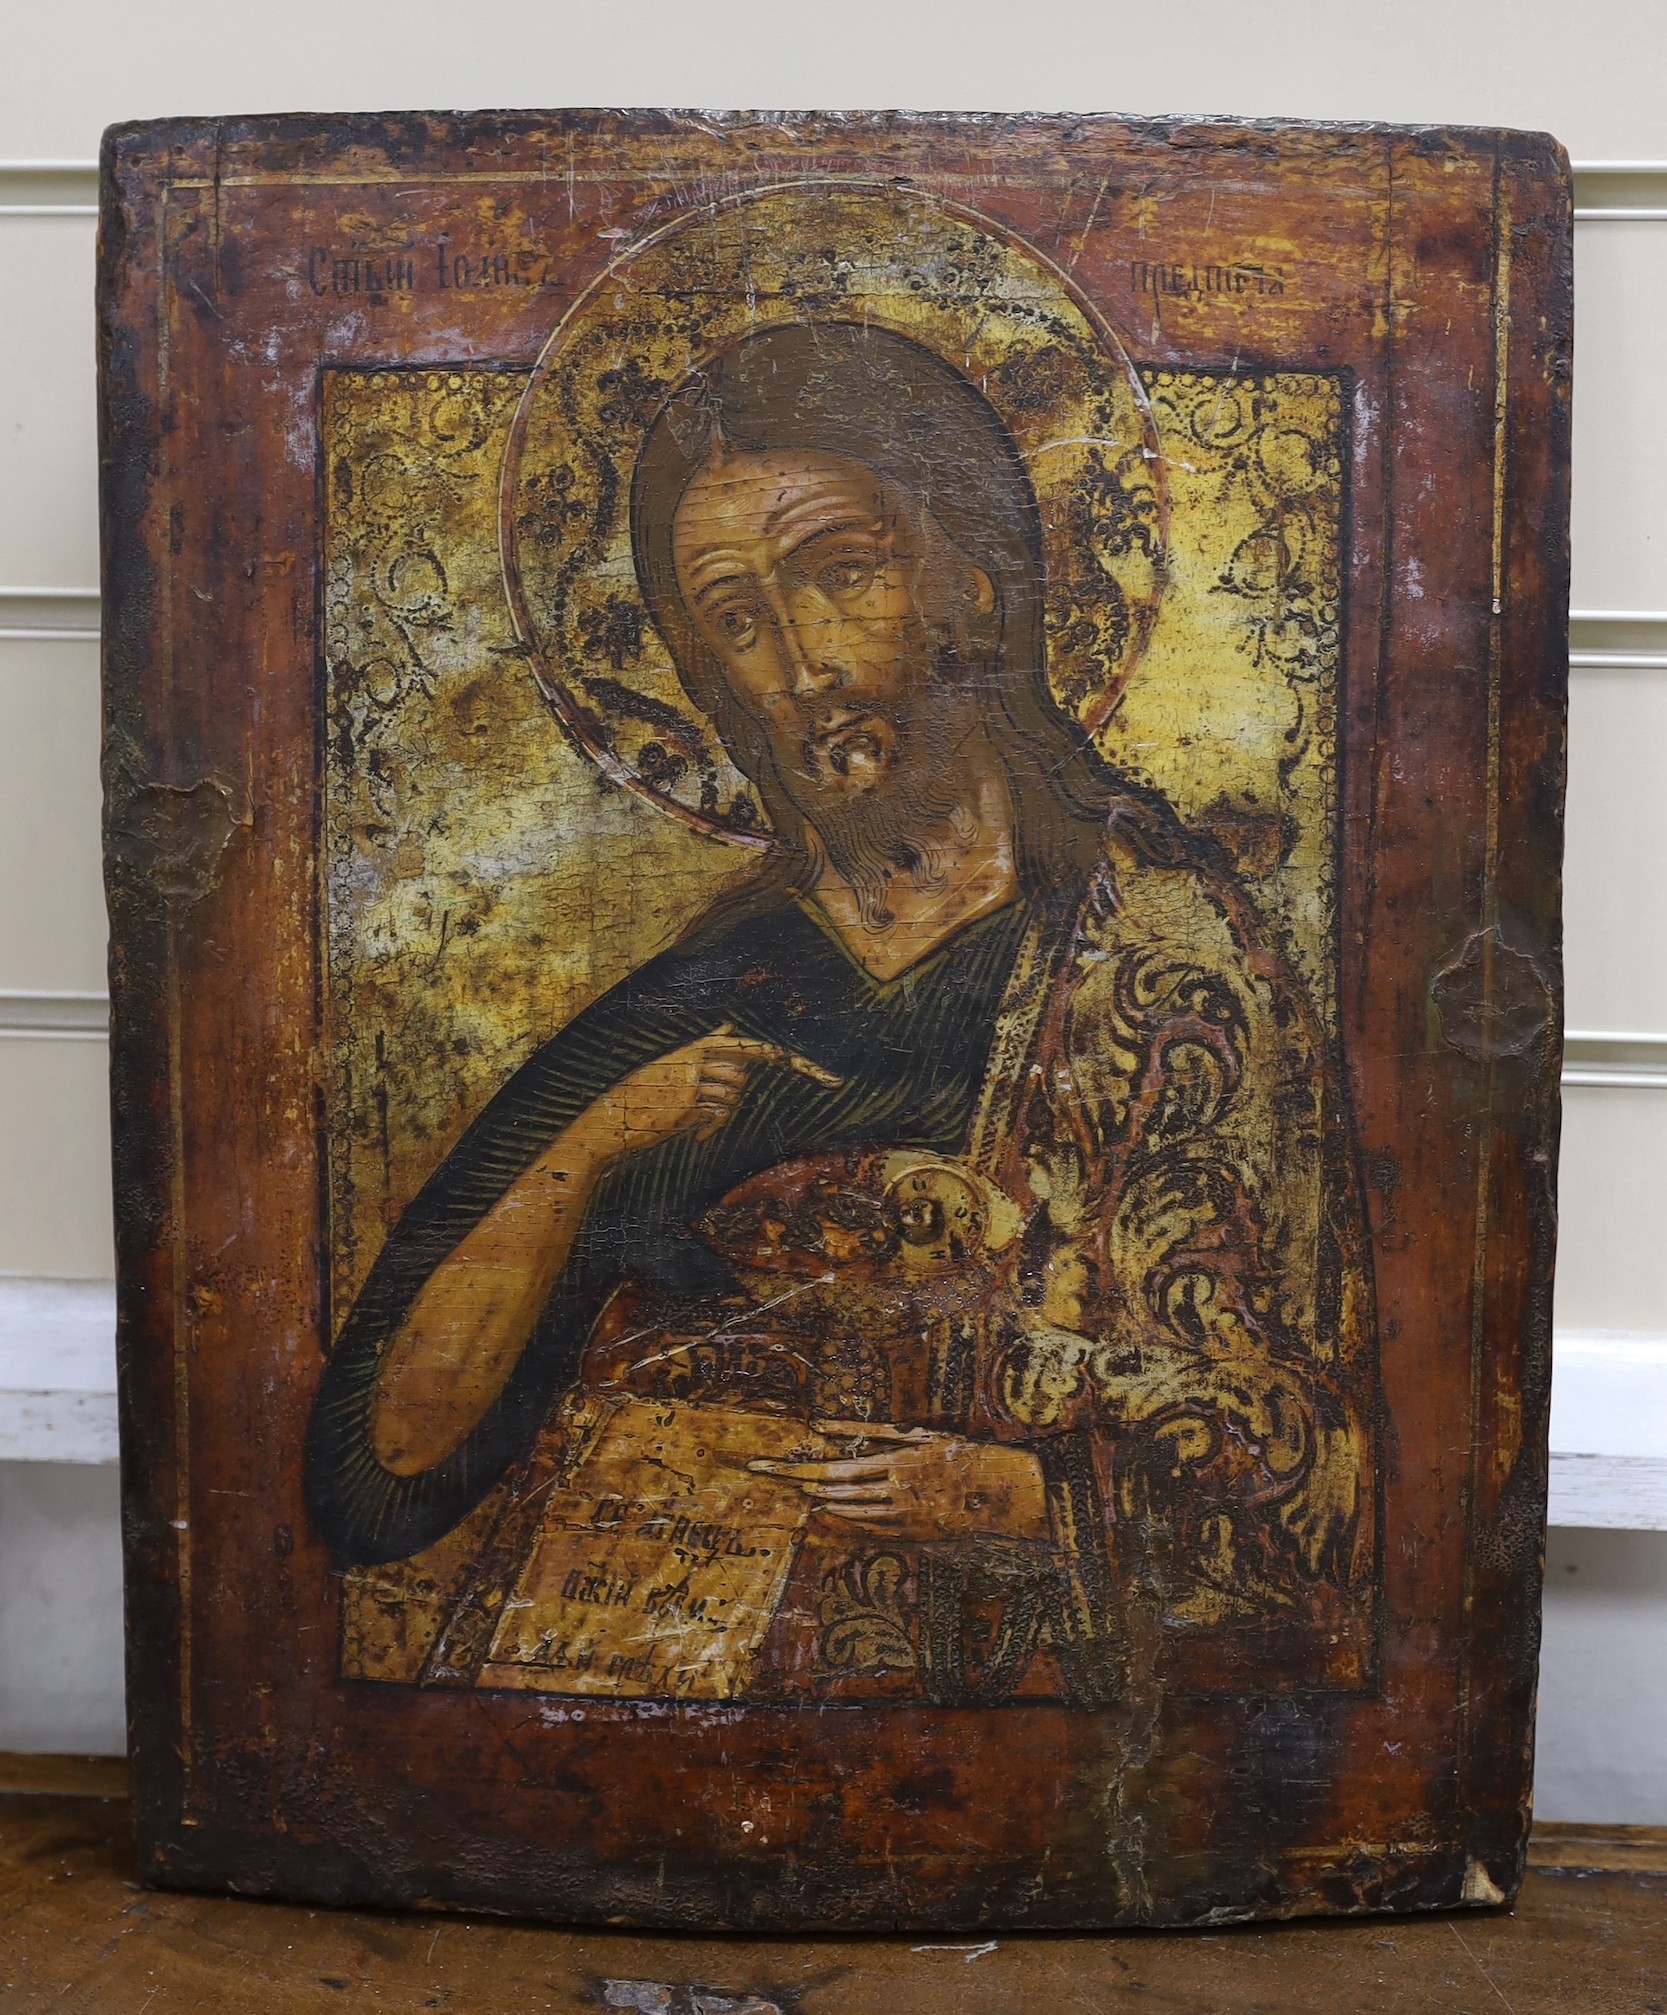 19th century South Russian School, tempera on wooden panel, Icon of God holding the Christ child and giving a benediction, 40 x 33cm, unframed